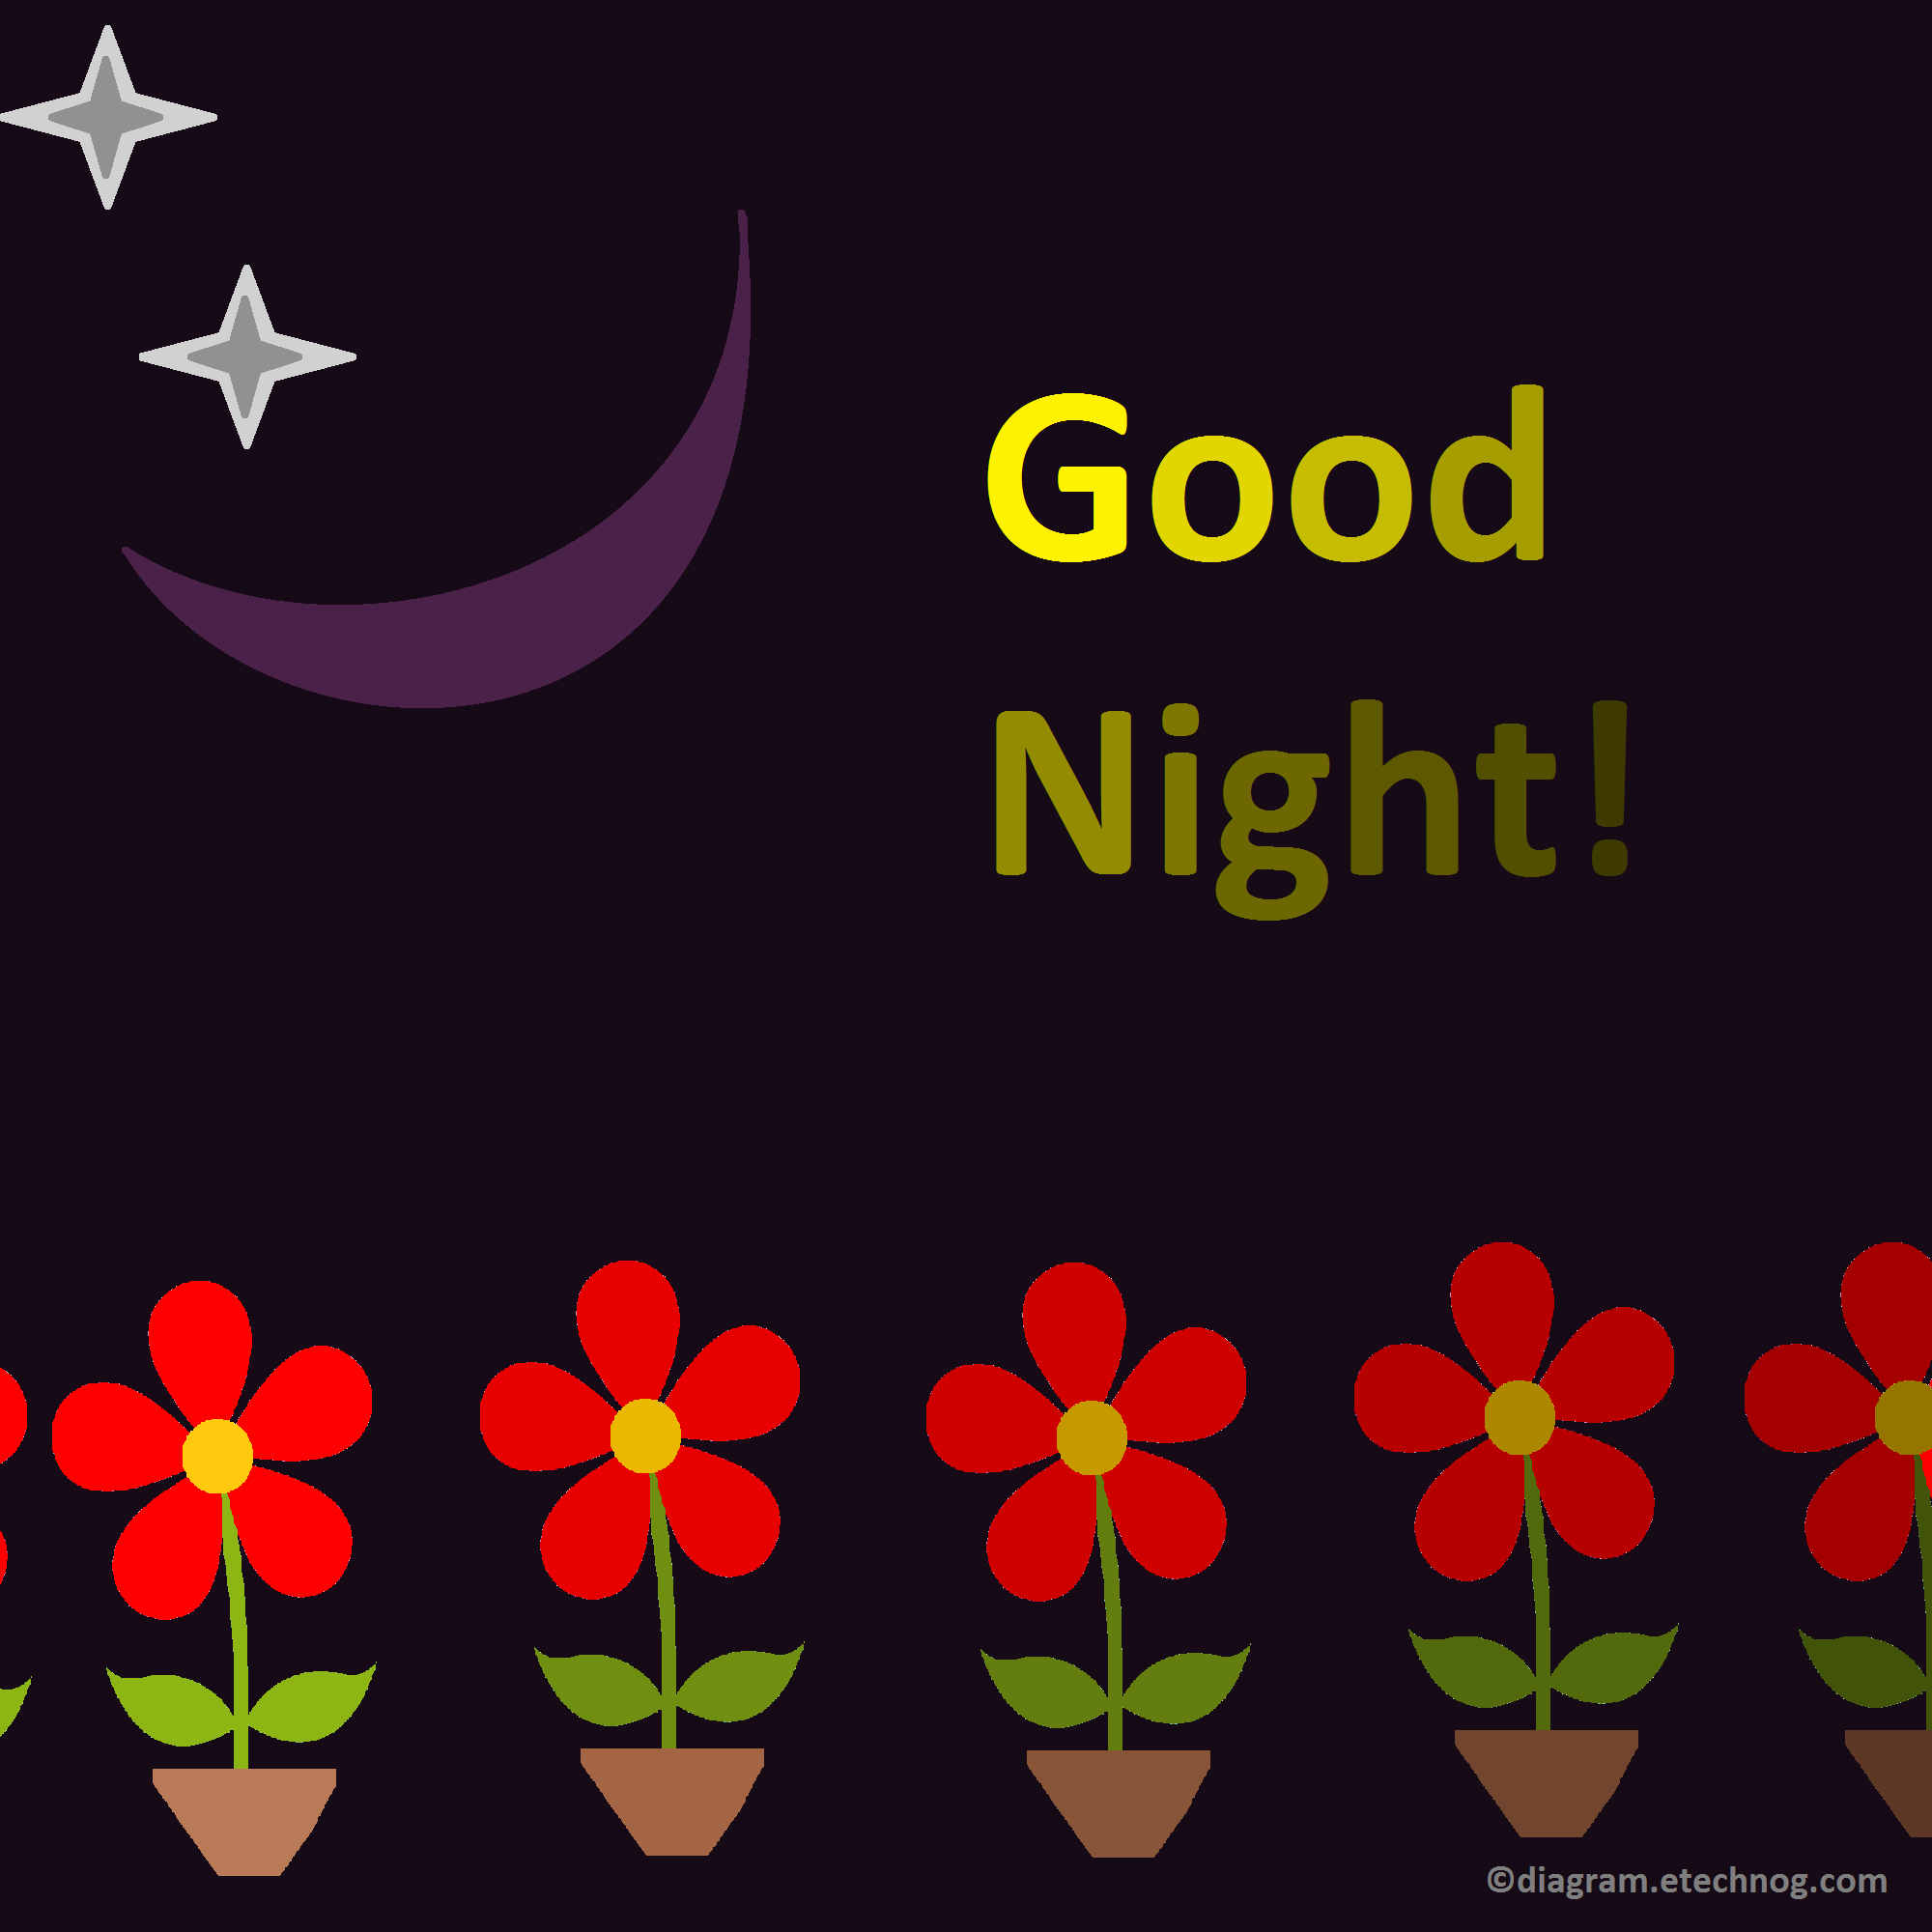 Good Night Image(with moon, flower)